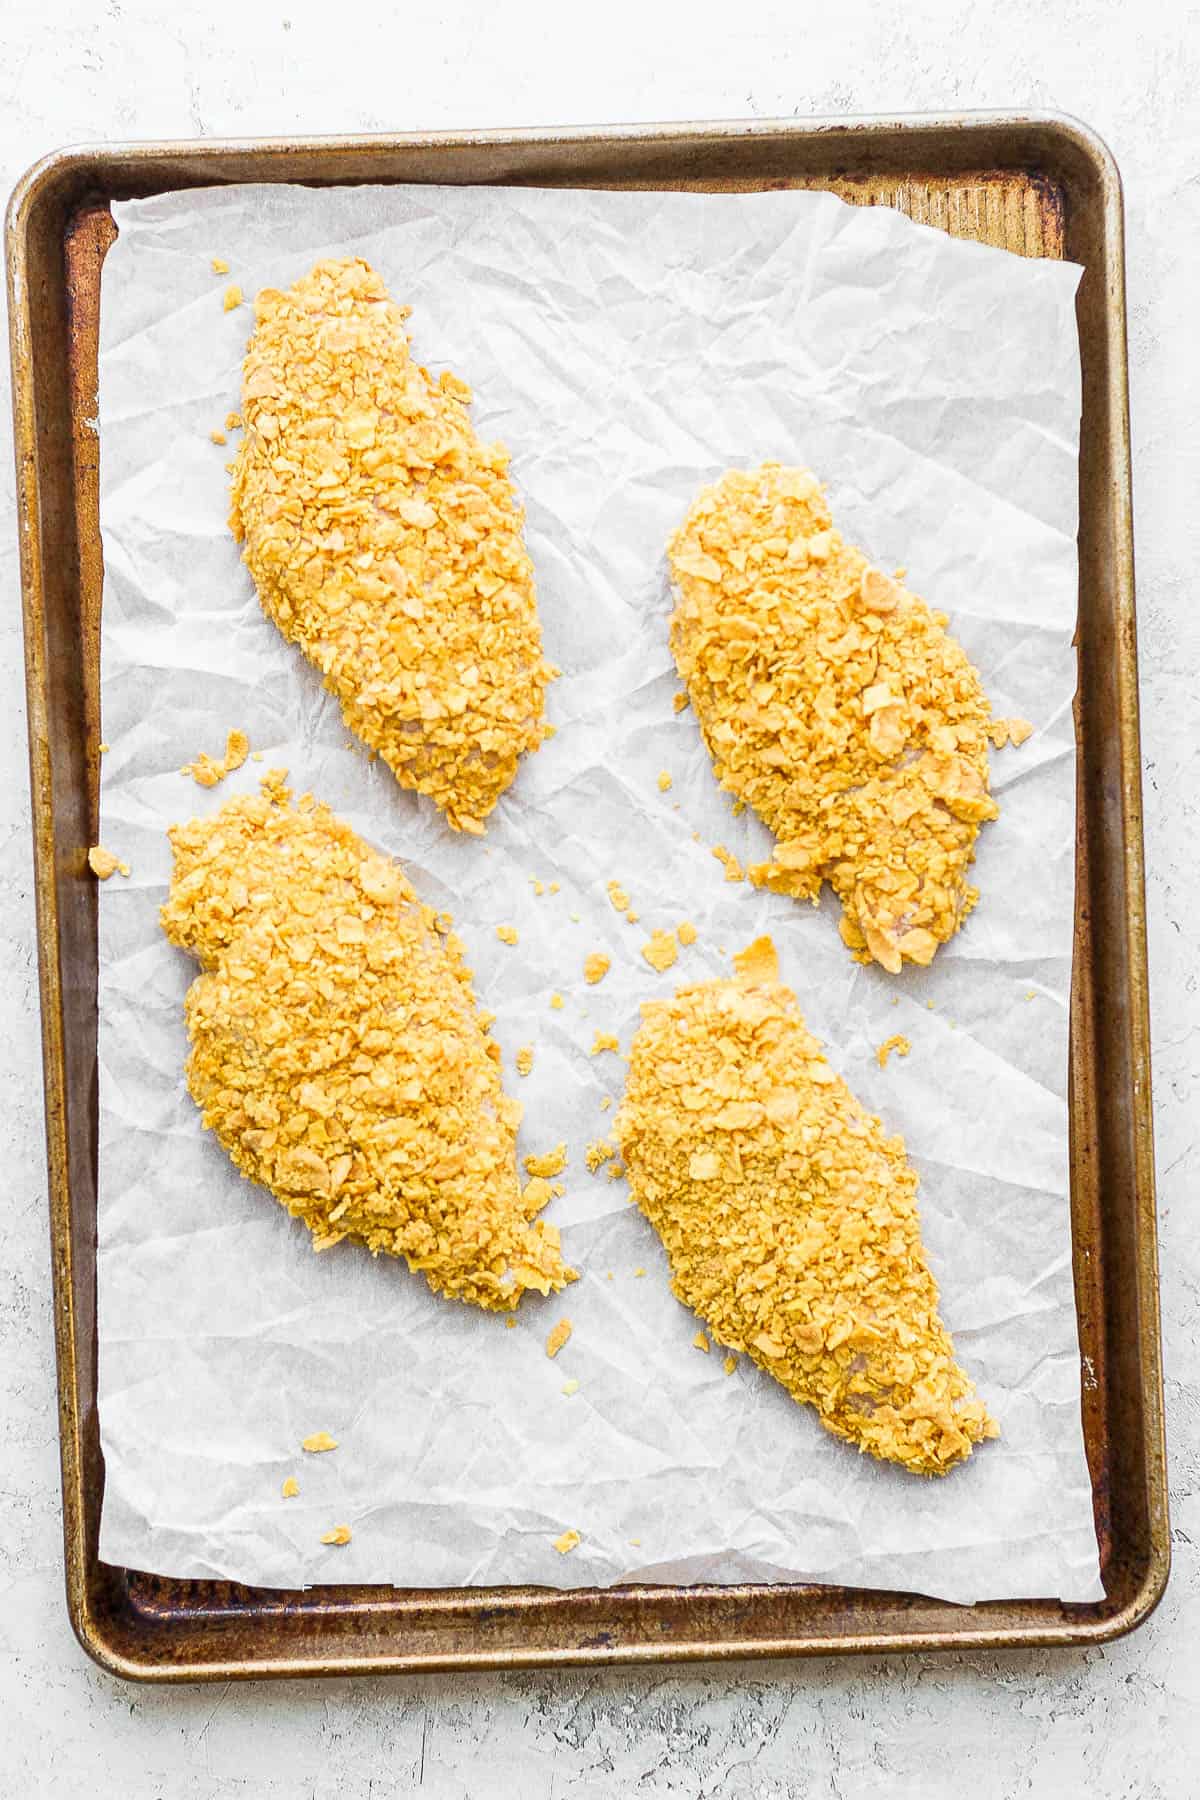 Cornflake-crusted chicken breasts on a parchment-lined baking sheet.